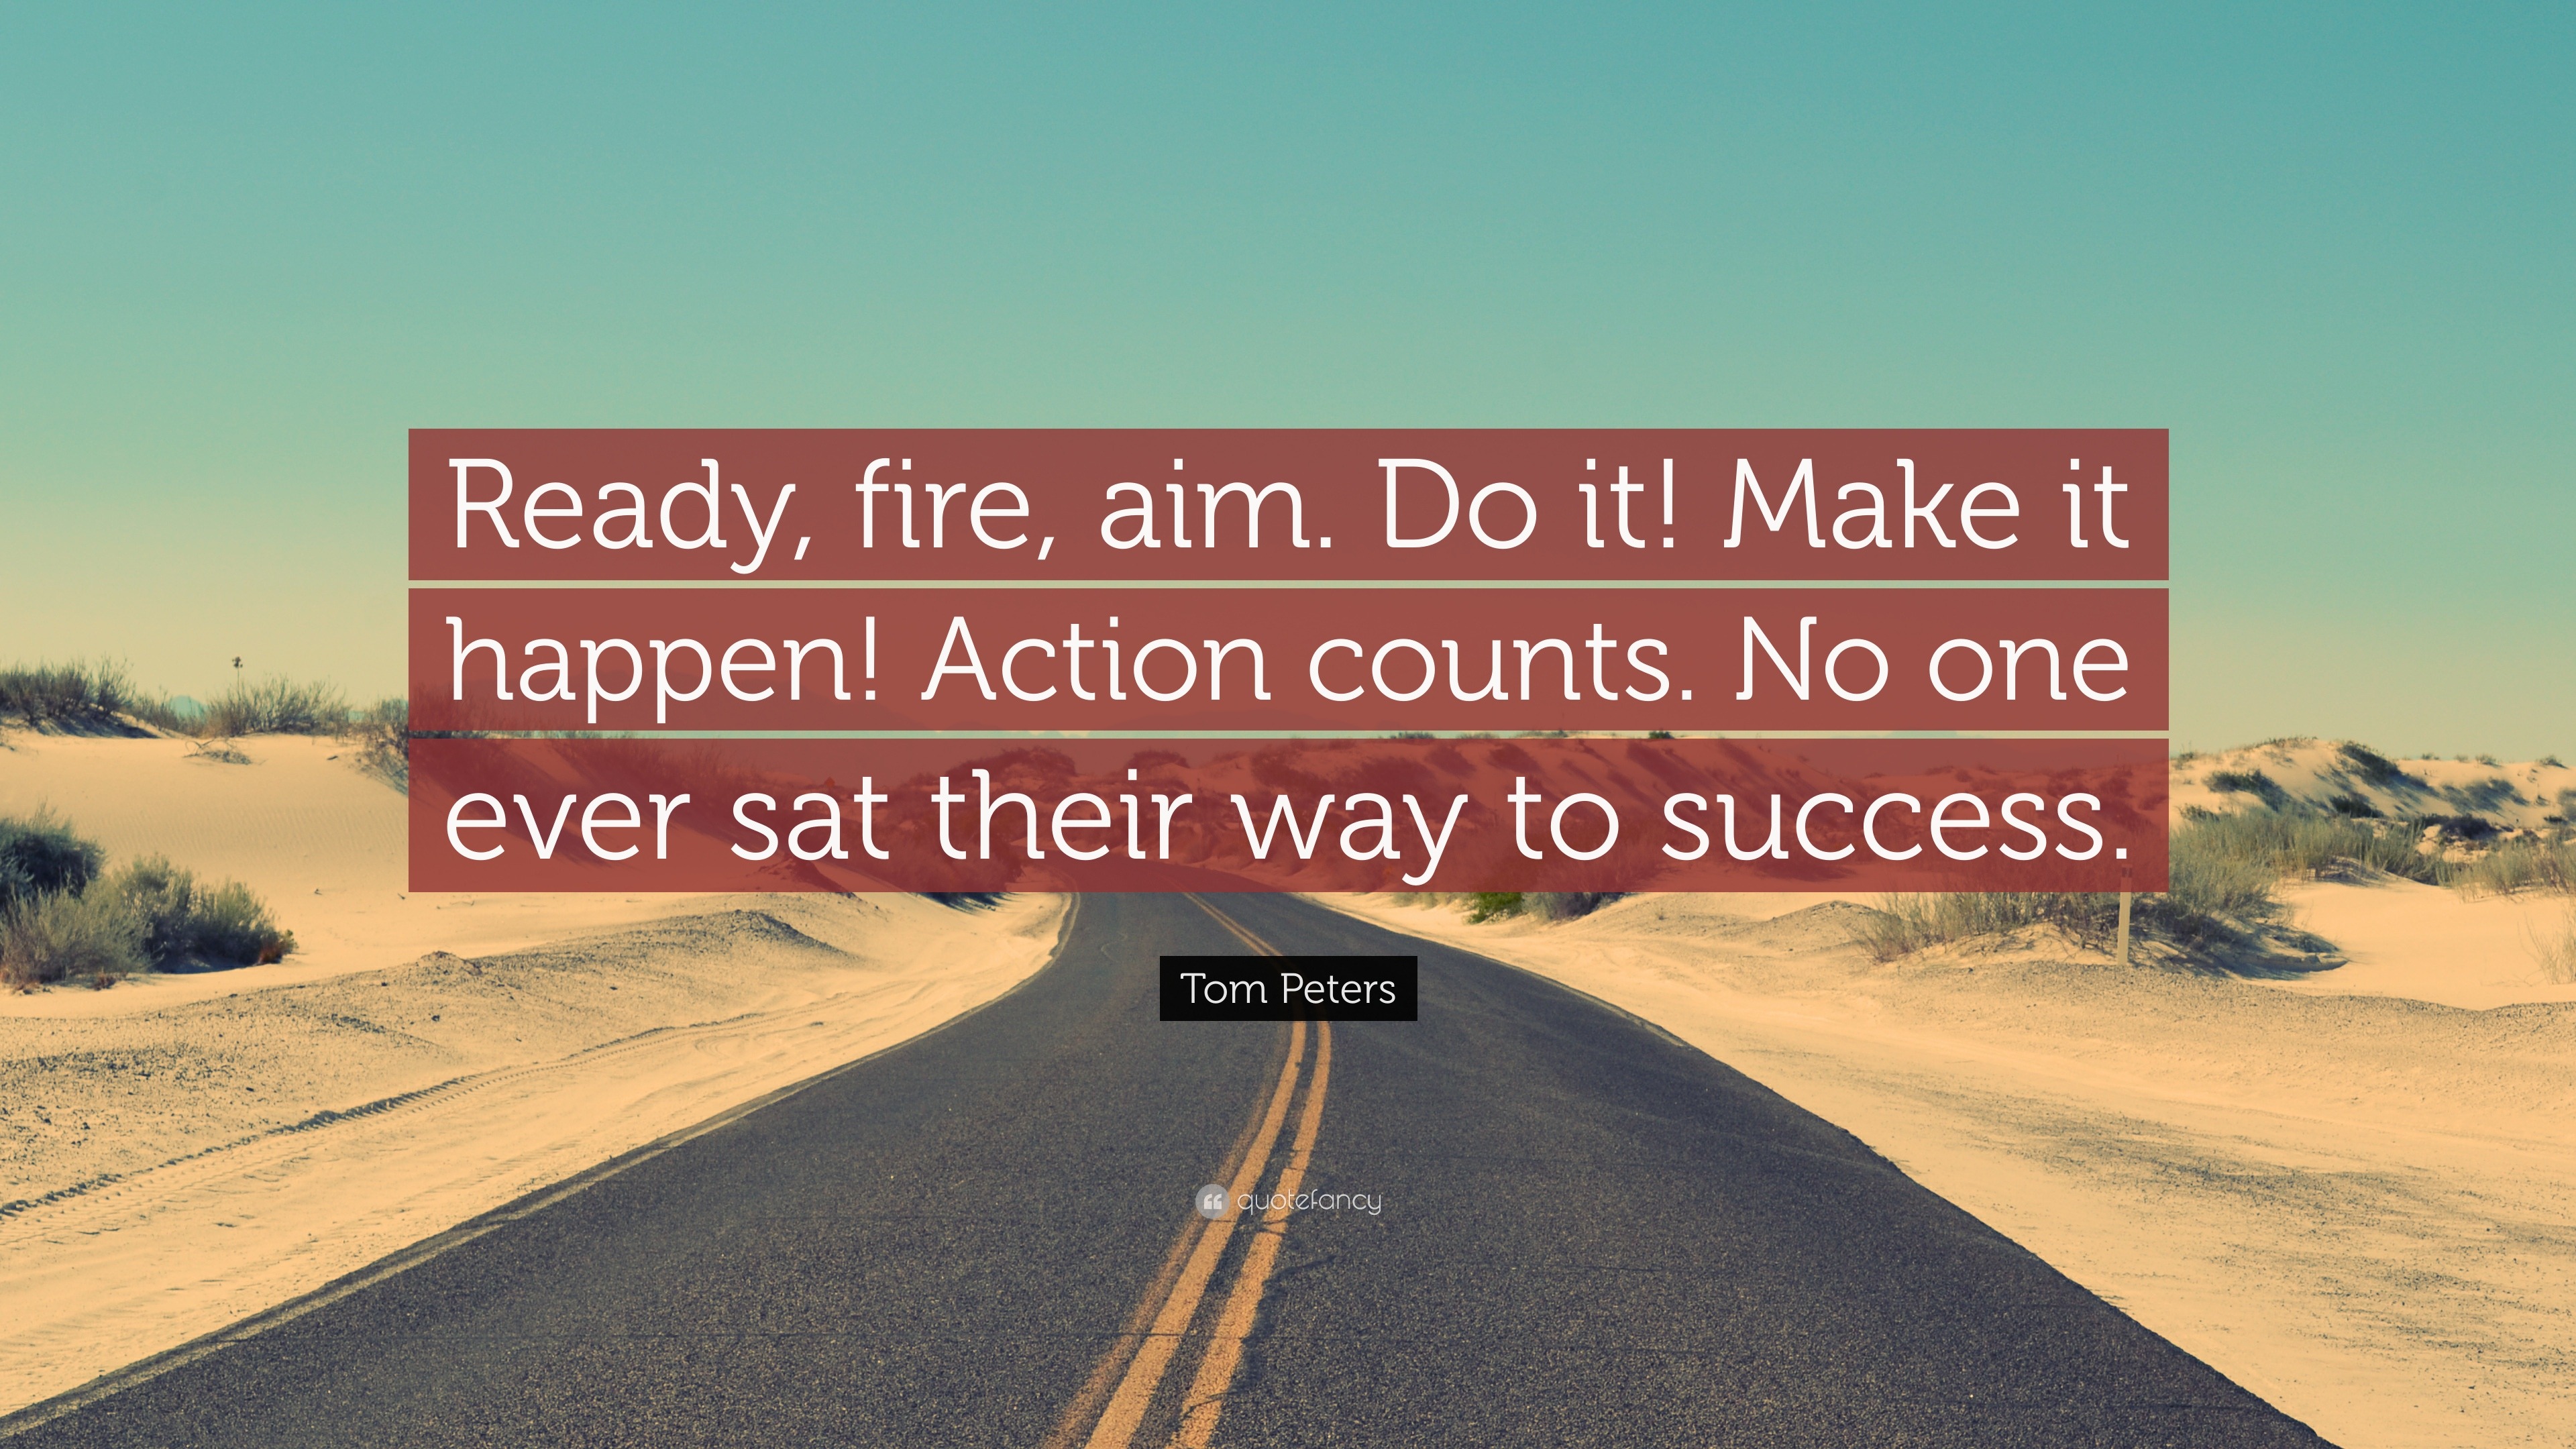 Tom Peters Quote: "Ready, fire, aim. Do it! Make it happen ...